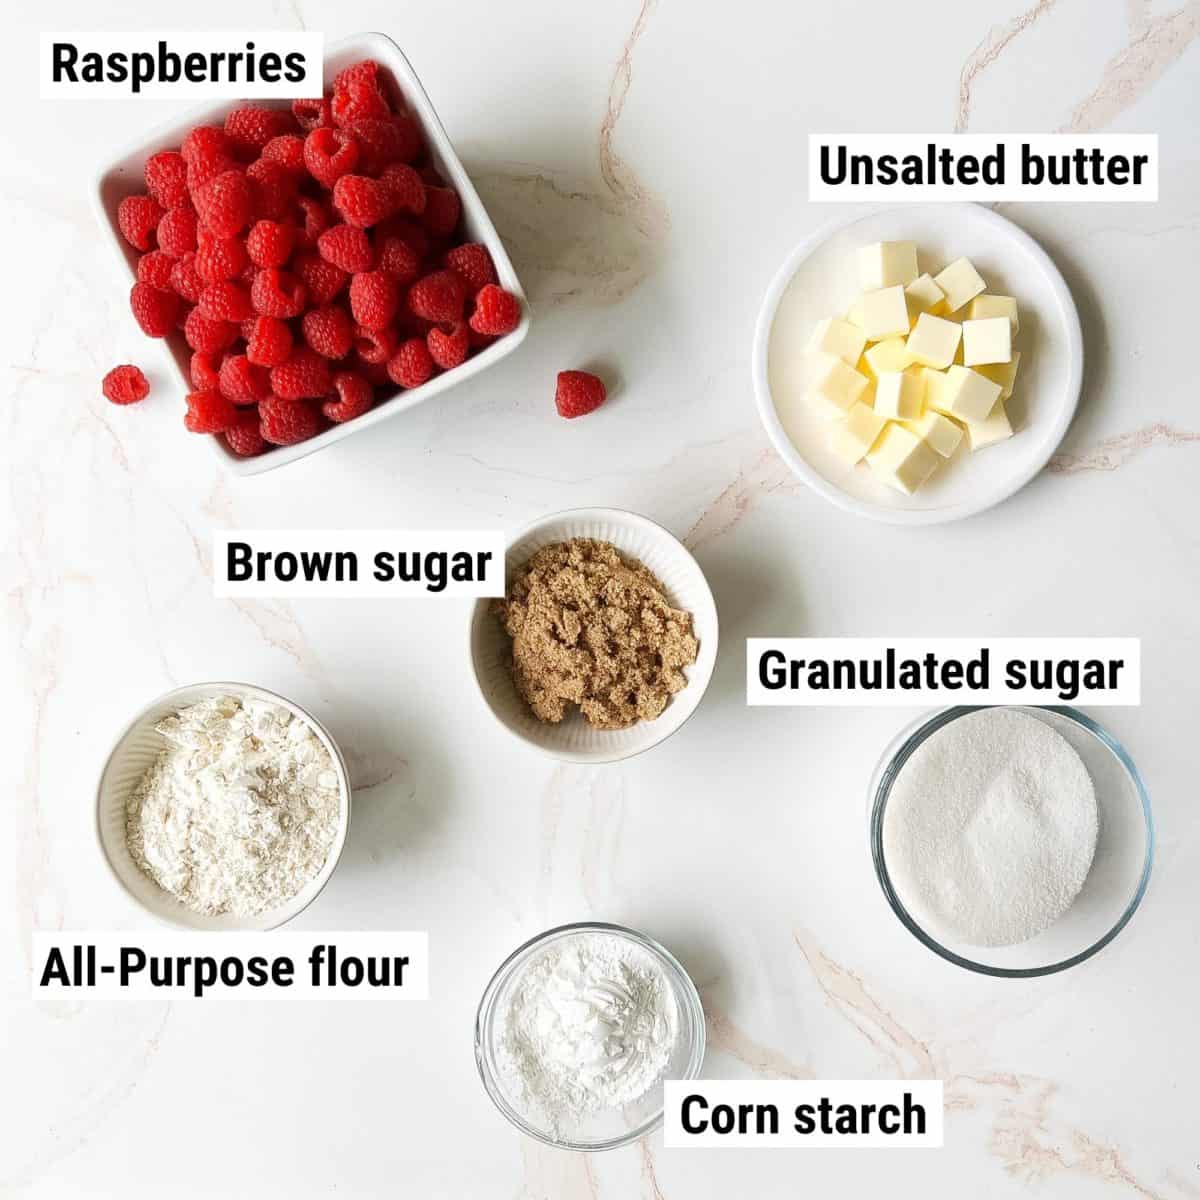 The ingredients used to make raspberry crisp spread out on a table.